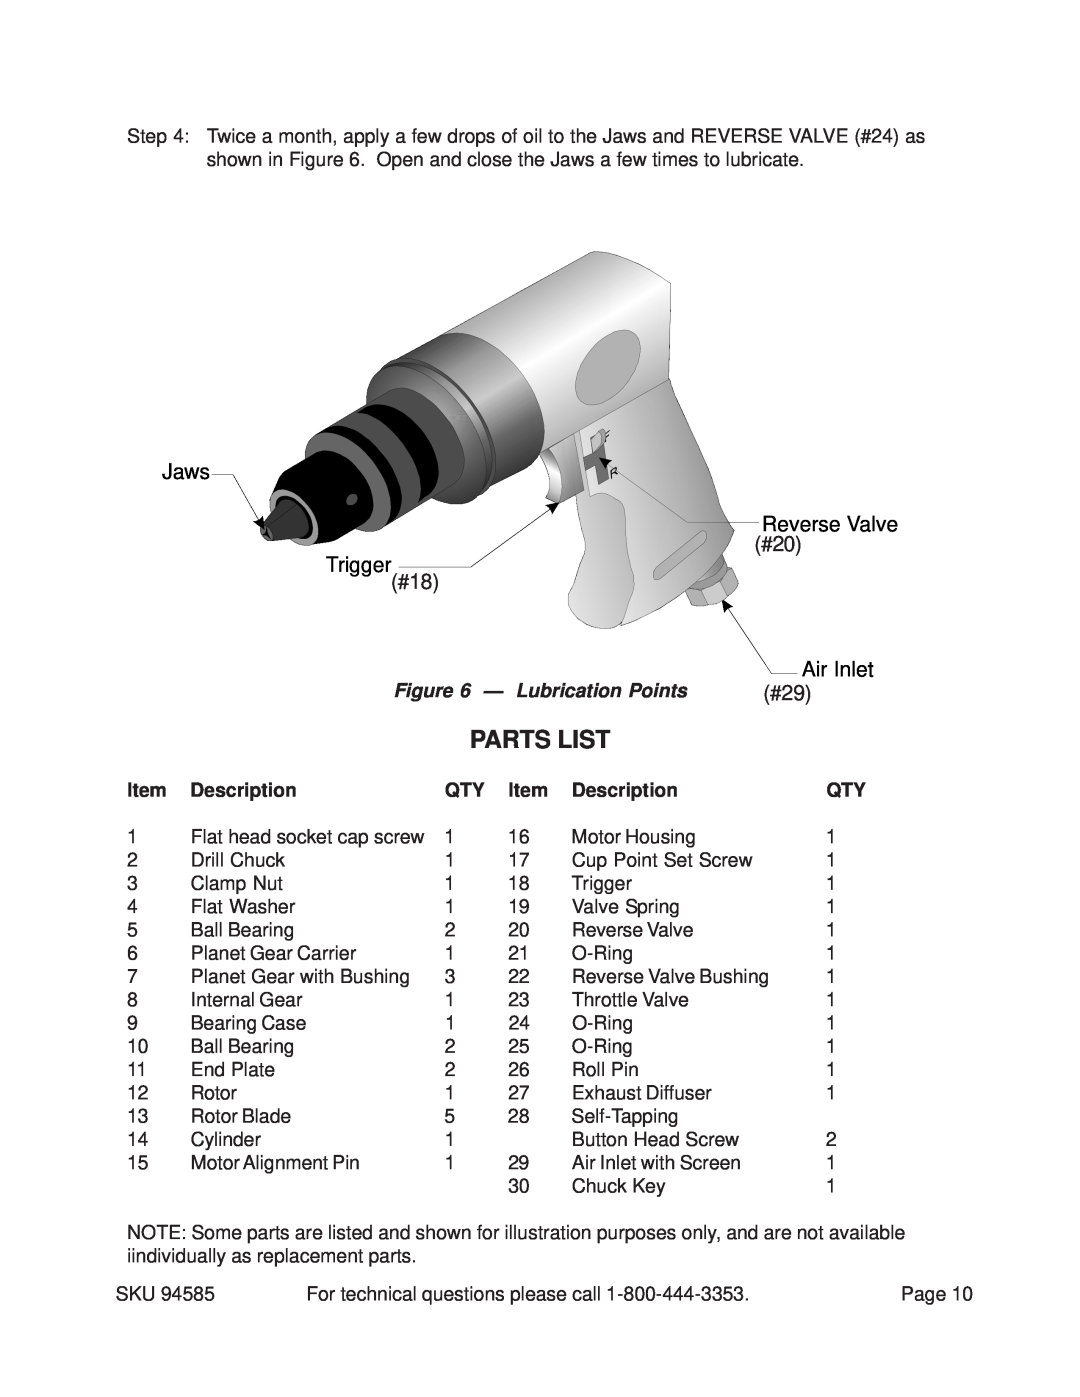 Harbor Freight Tools 94585 operating instructions Parts List, Jaws, Reverse Valve, Trigger, Air Inlet 